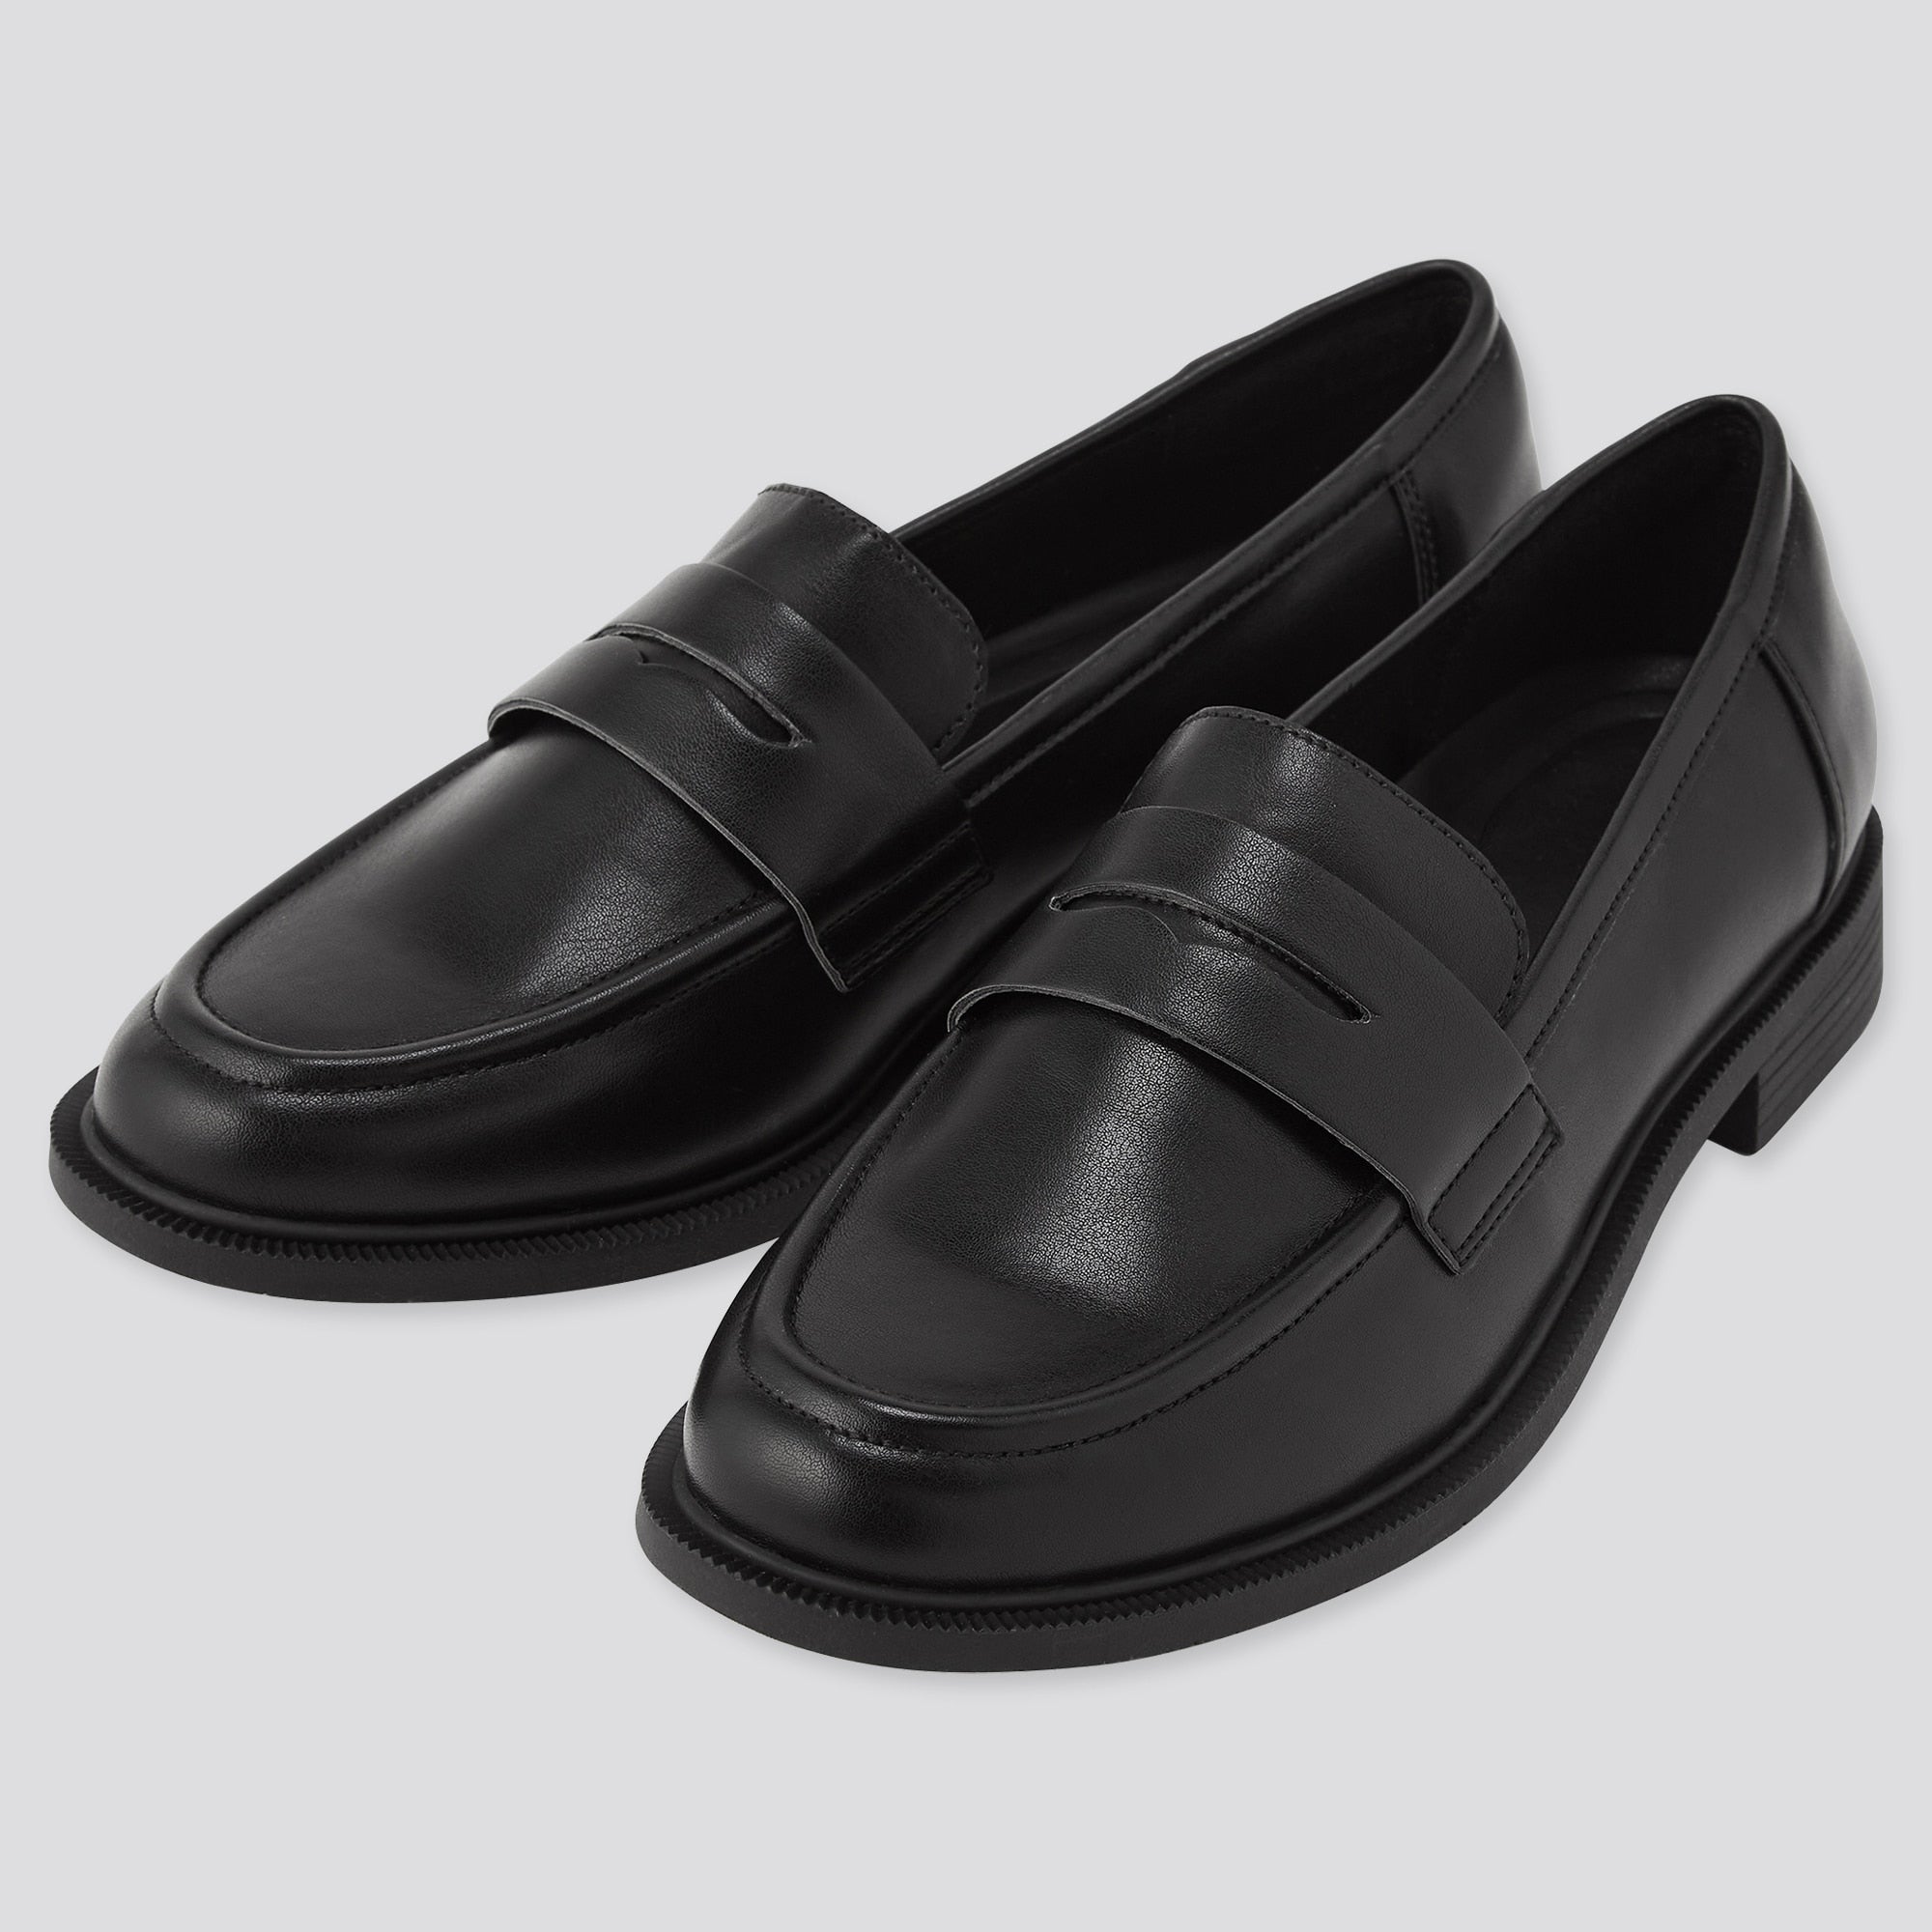 Uniqlo + WOMEN COMFORT FEEL TOUCH LOAFERS